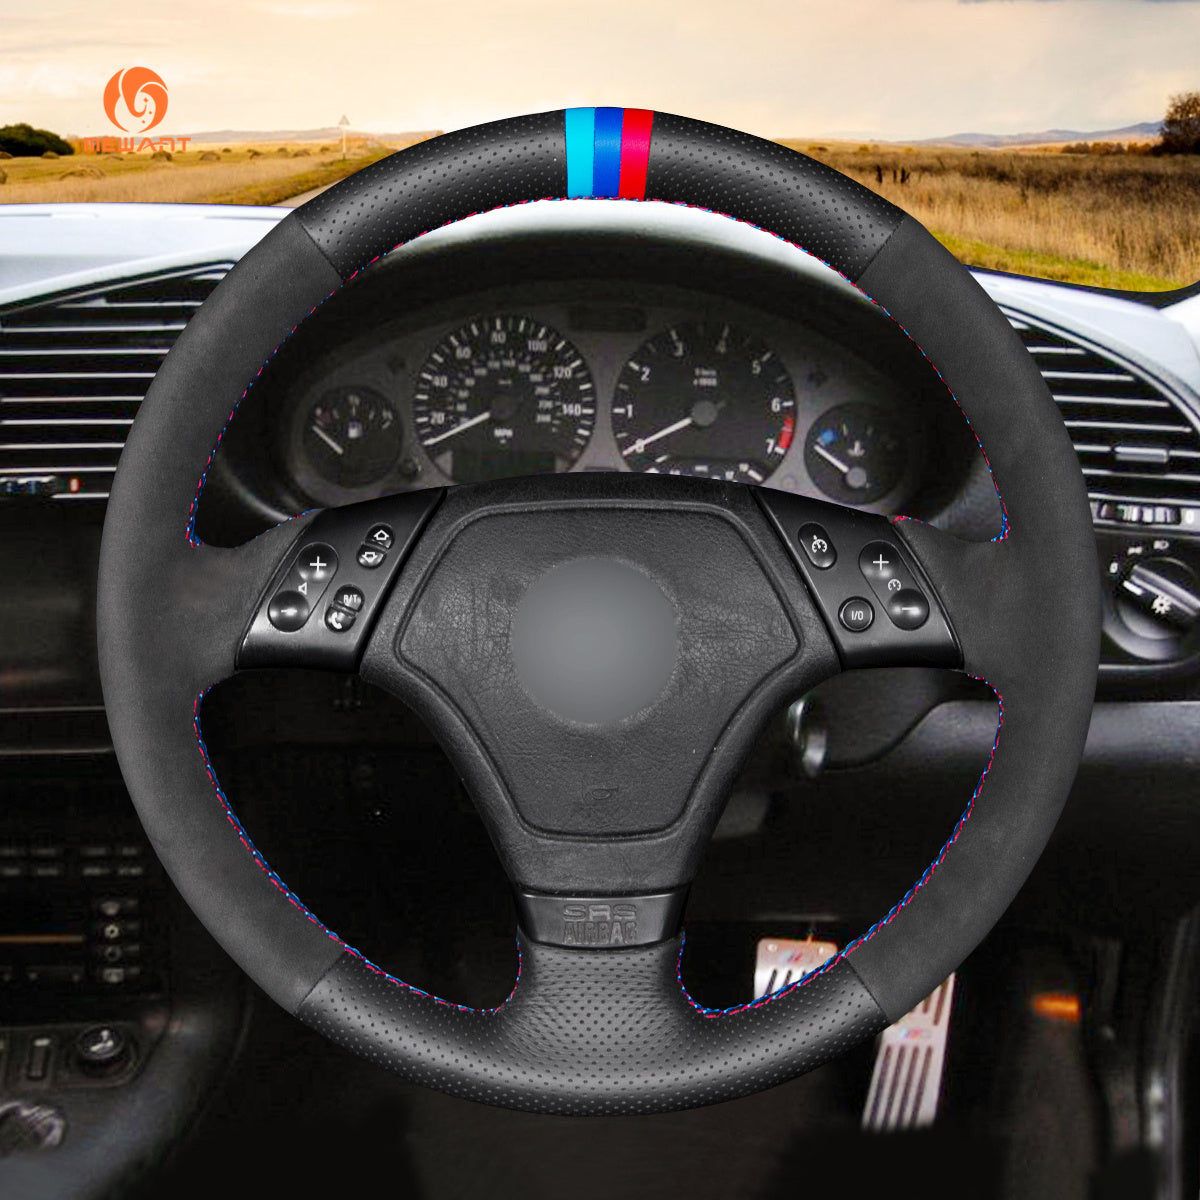 MEWANT Hand Stitch Car Steering Wheel Cover for BMW 3 Series E36 1995-2000